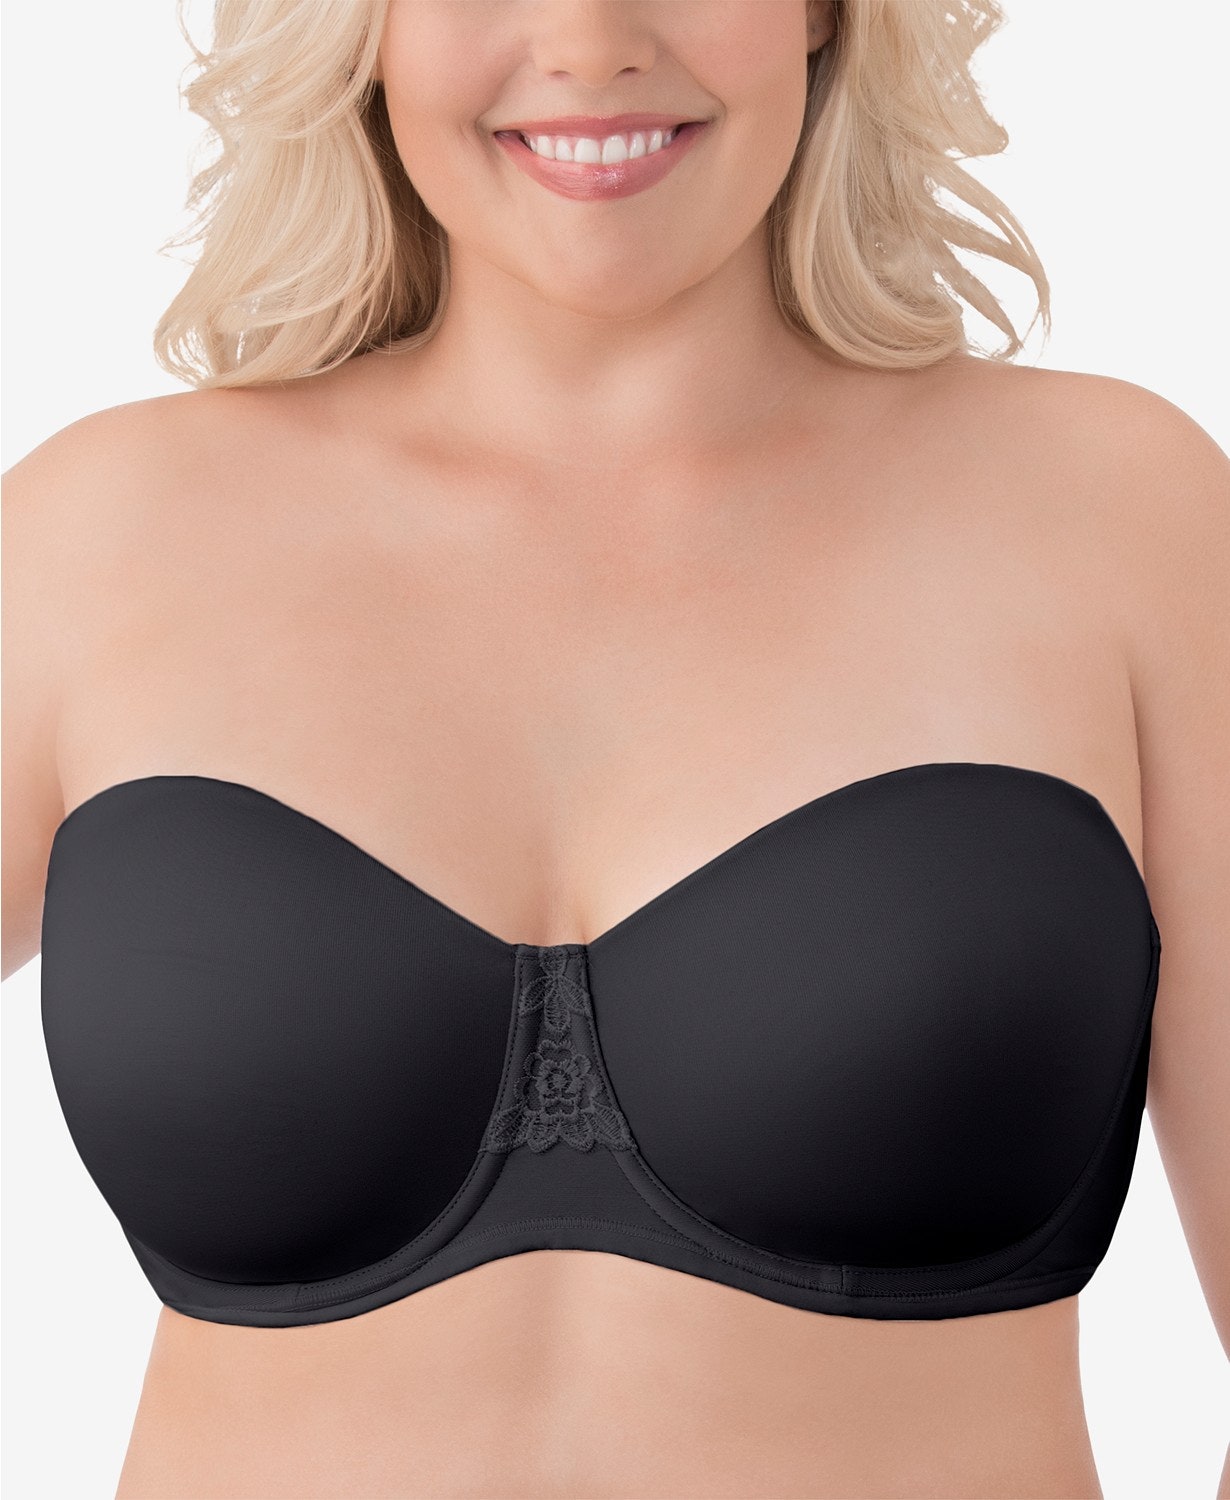 corey whalen reccomend strapless bra for busty pic